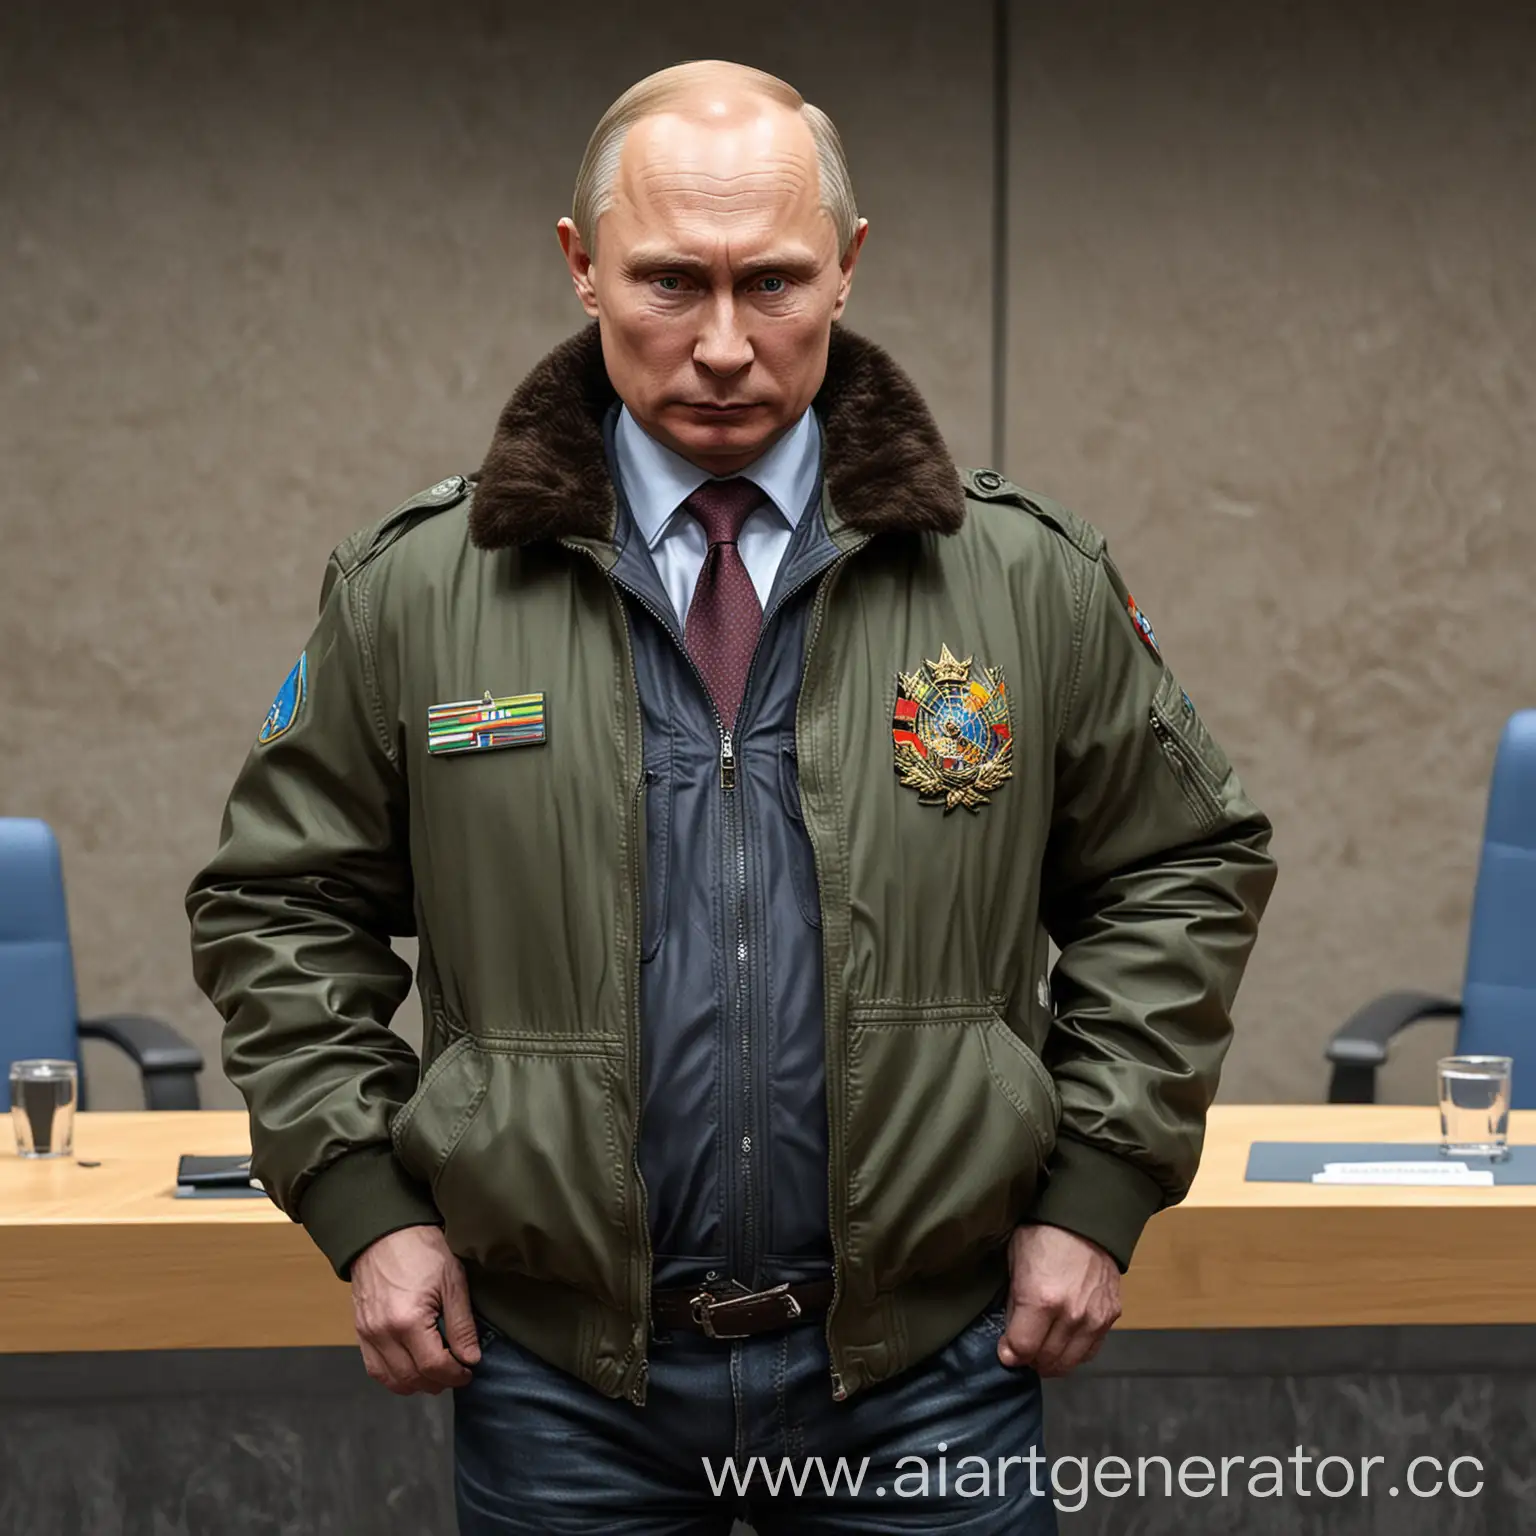 Vladimir-Putin-Stands-Bold-in-Jacket-at-UN-Assembly